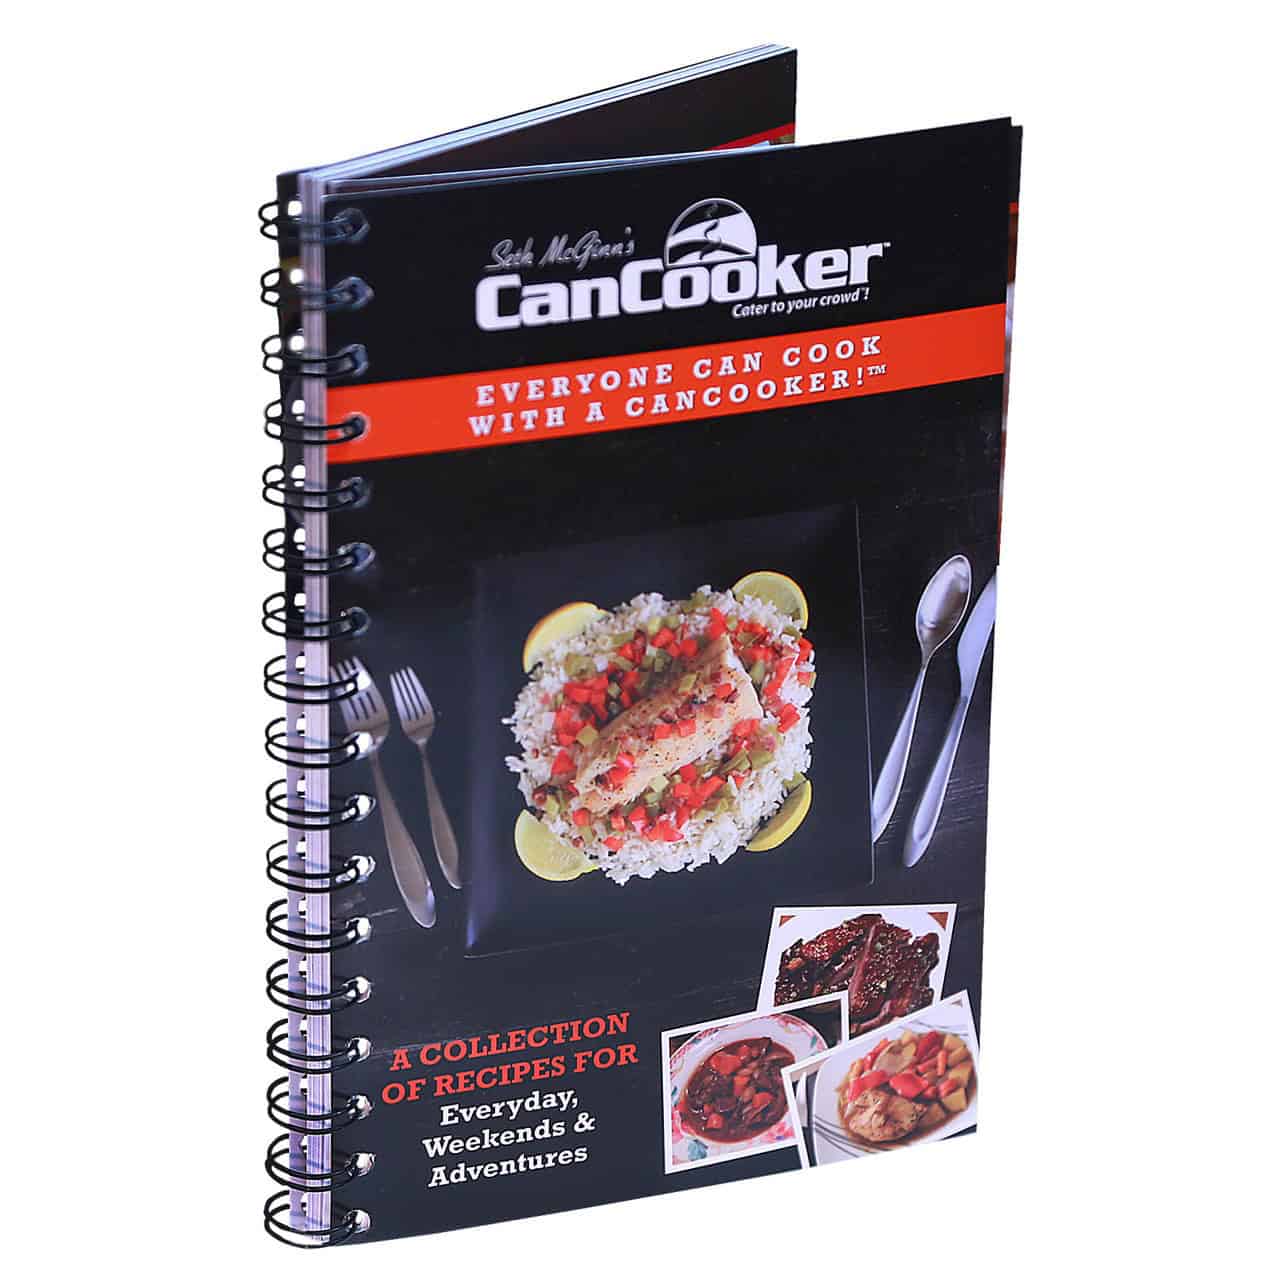 Cooking with CanCooker - Seth McGinn's CanCooker